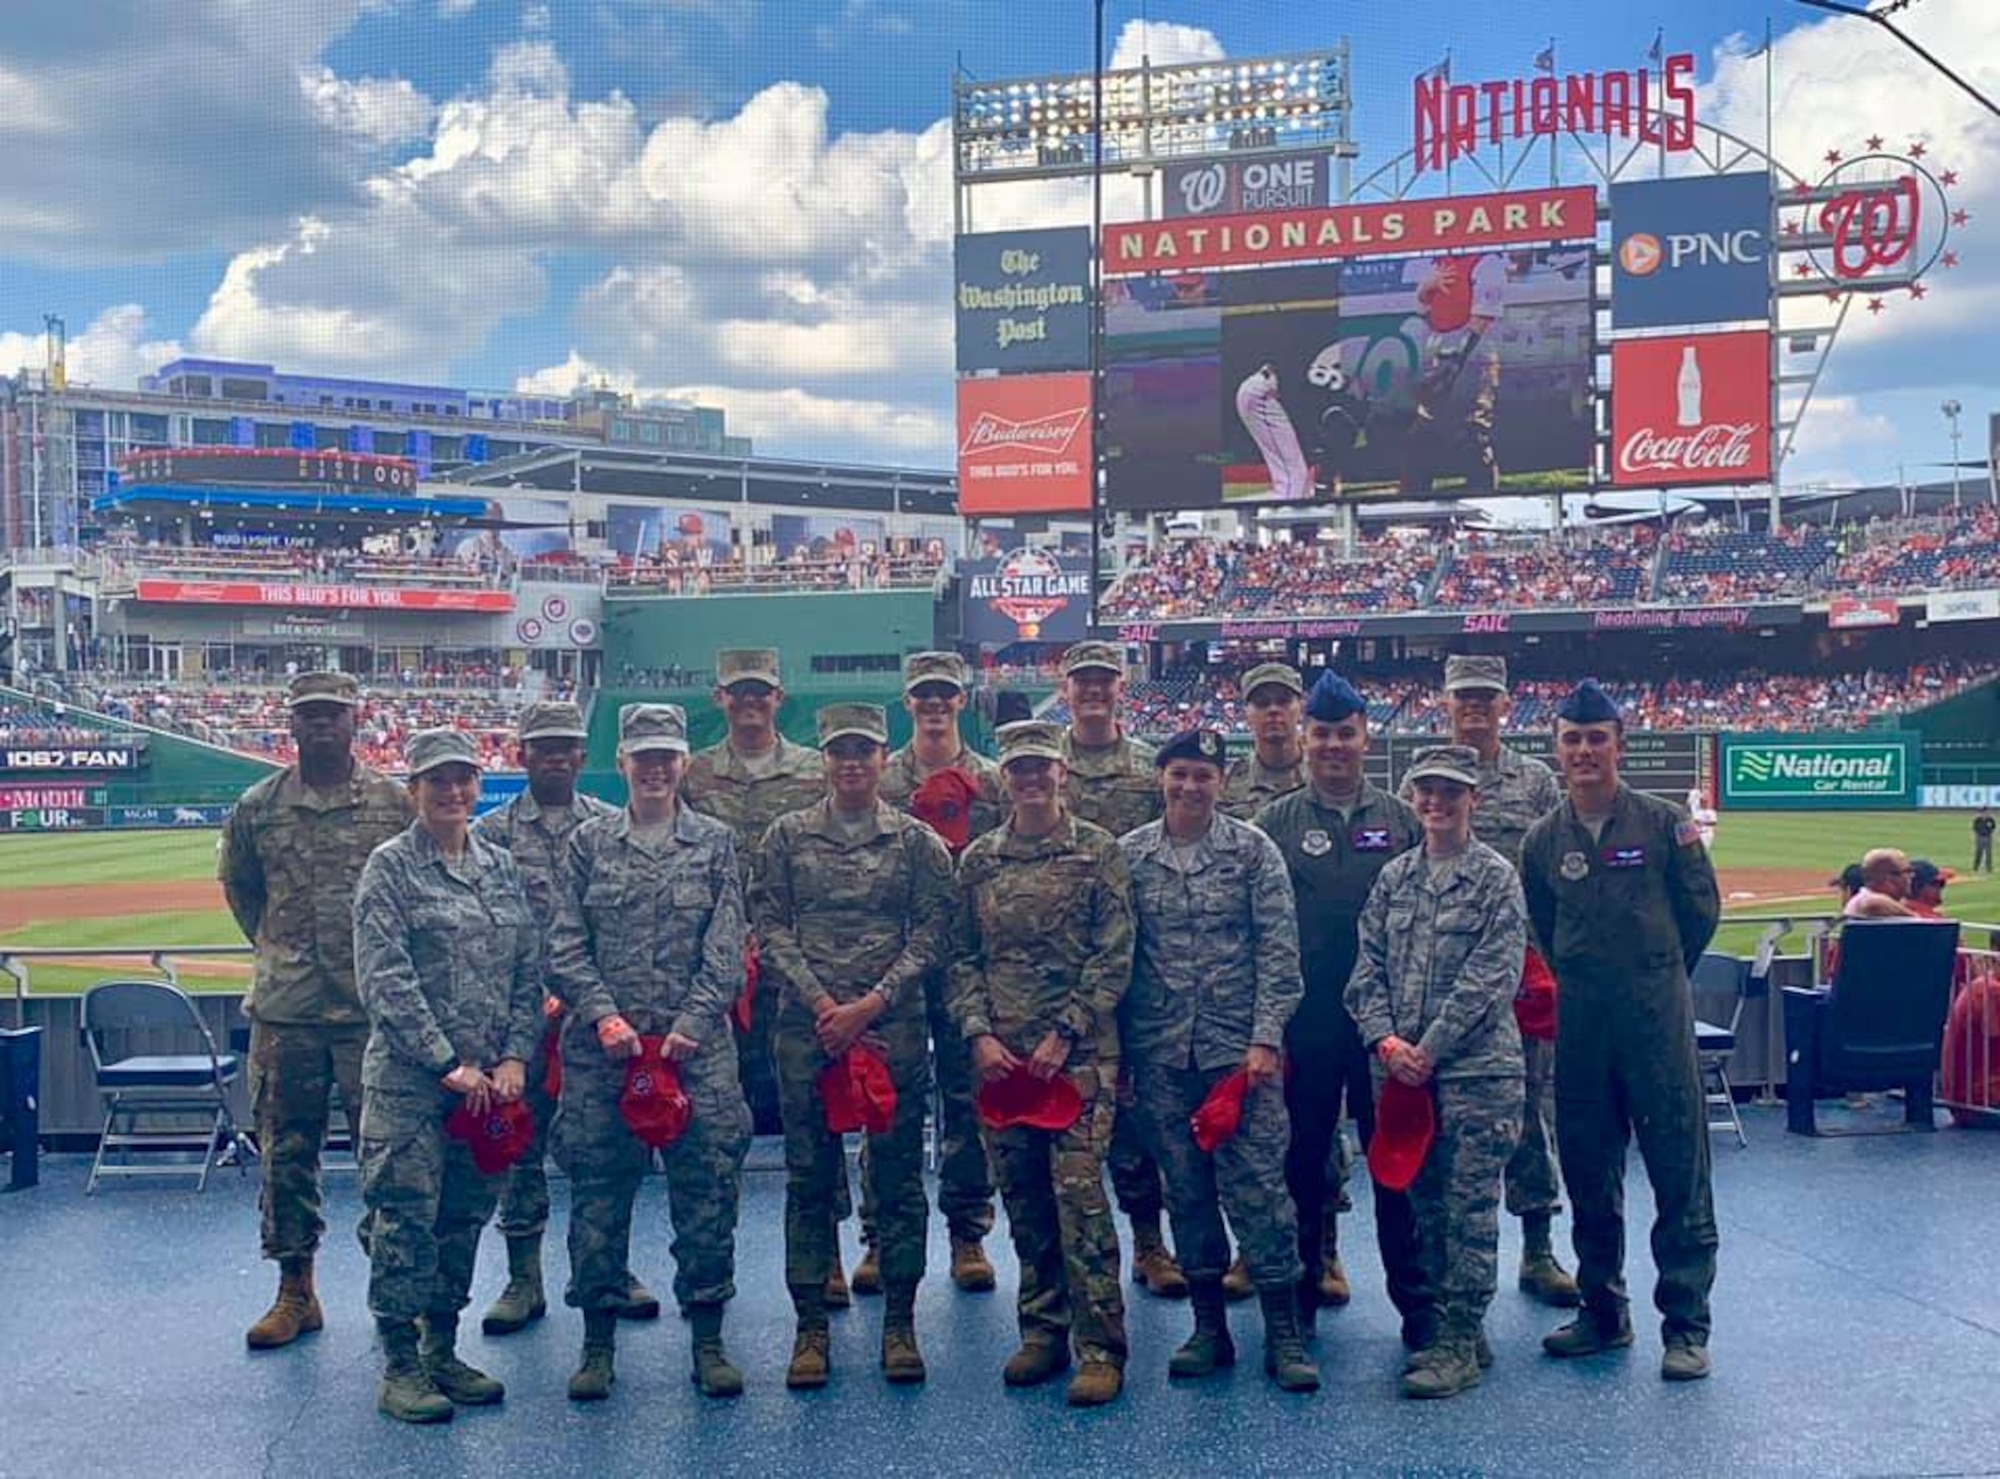 Air Force District of Washington Airmen pose for a photo in front of the Delta Sky360 Club as part of the Salute to Service event July 25. The Washington Nationals offer year-round experiences as thanks and quality-of-life outreach for service members and their families in the Washington region. Around the third inning, honorees are recognized on the NatsHD scoreboard and receive a standing ovation from fans. The Colorado Rockies defeated the Nats 8-7. The next Salute to Service event takes place Aug. 13 against the Cincinnati Reds.